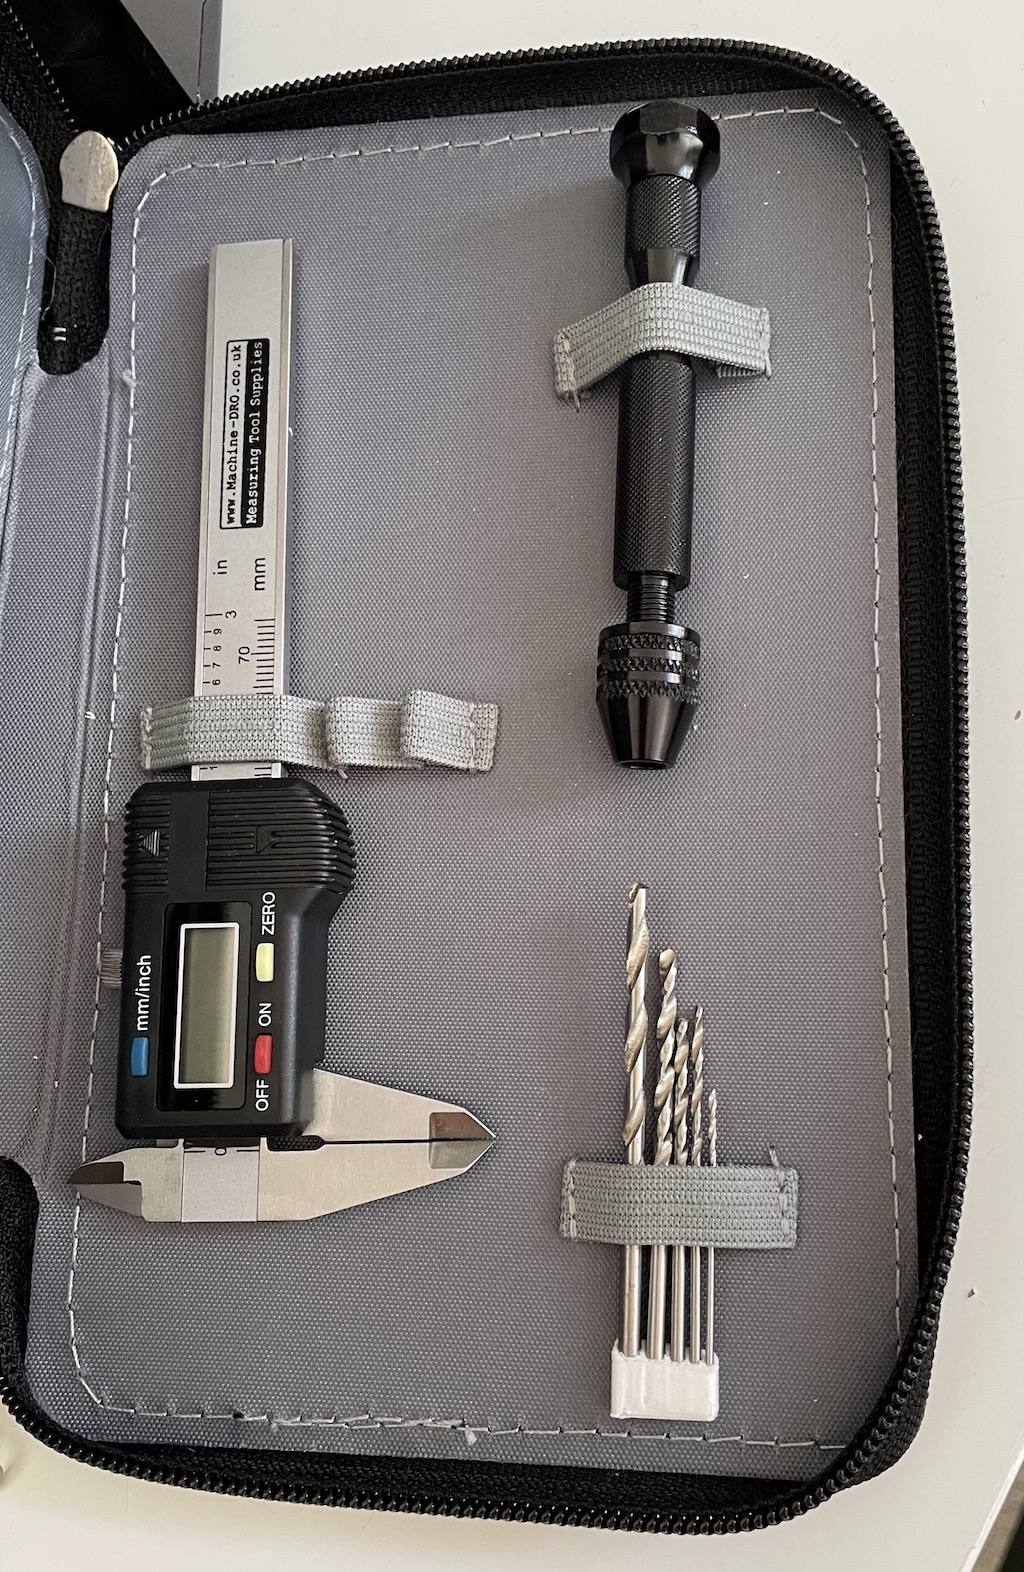 The Tiny Toolkit with the drill parts